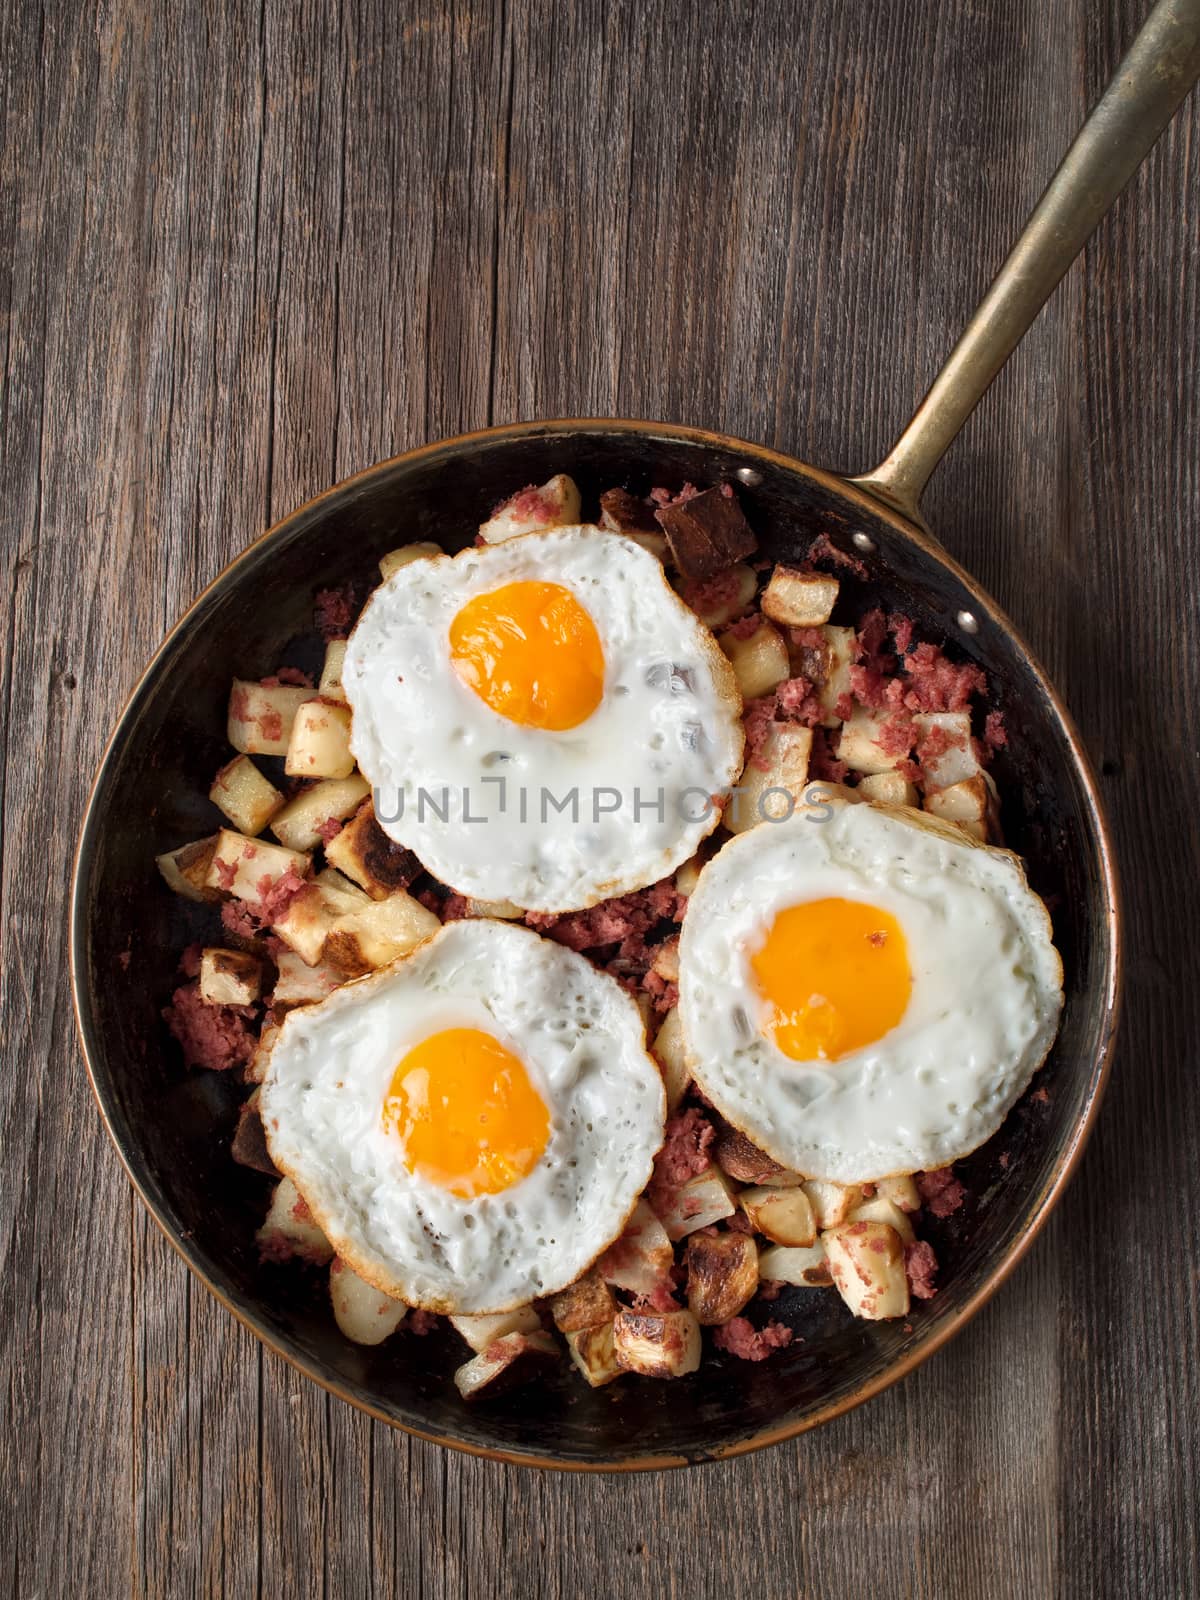 rustic corned beef hash by zkruger